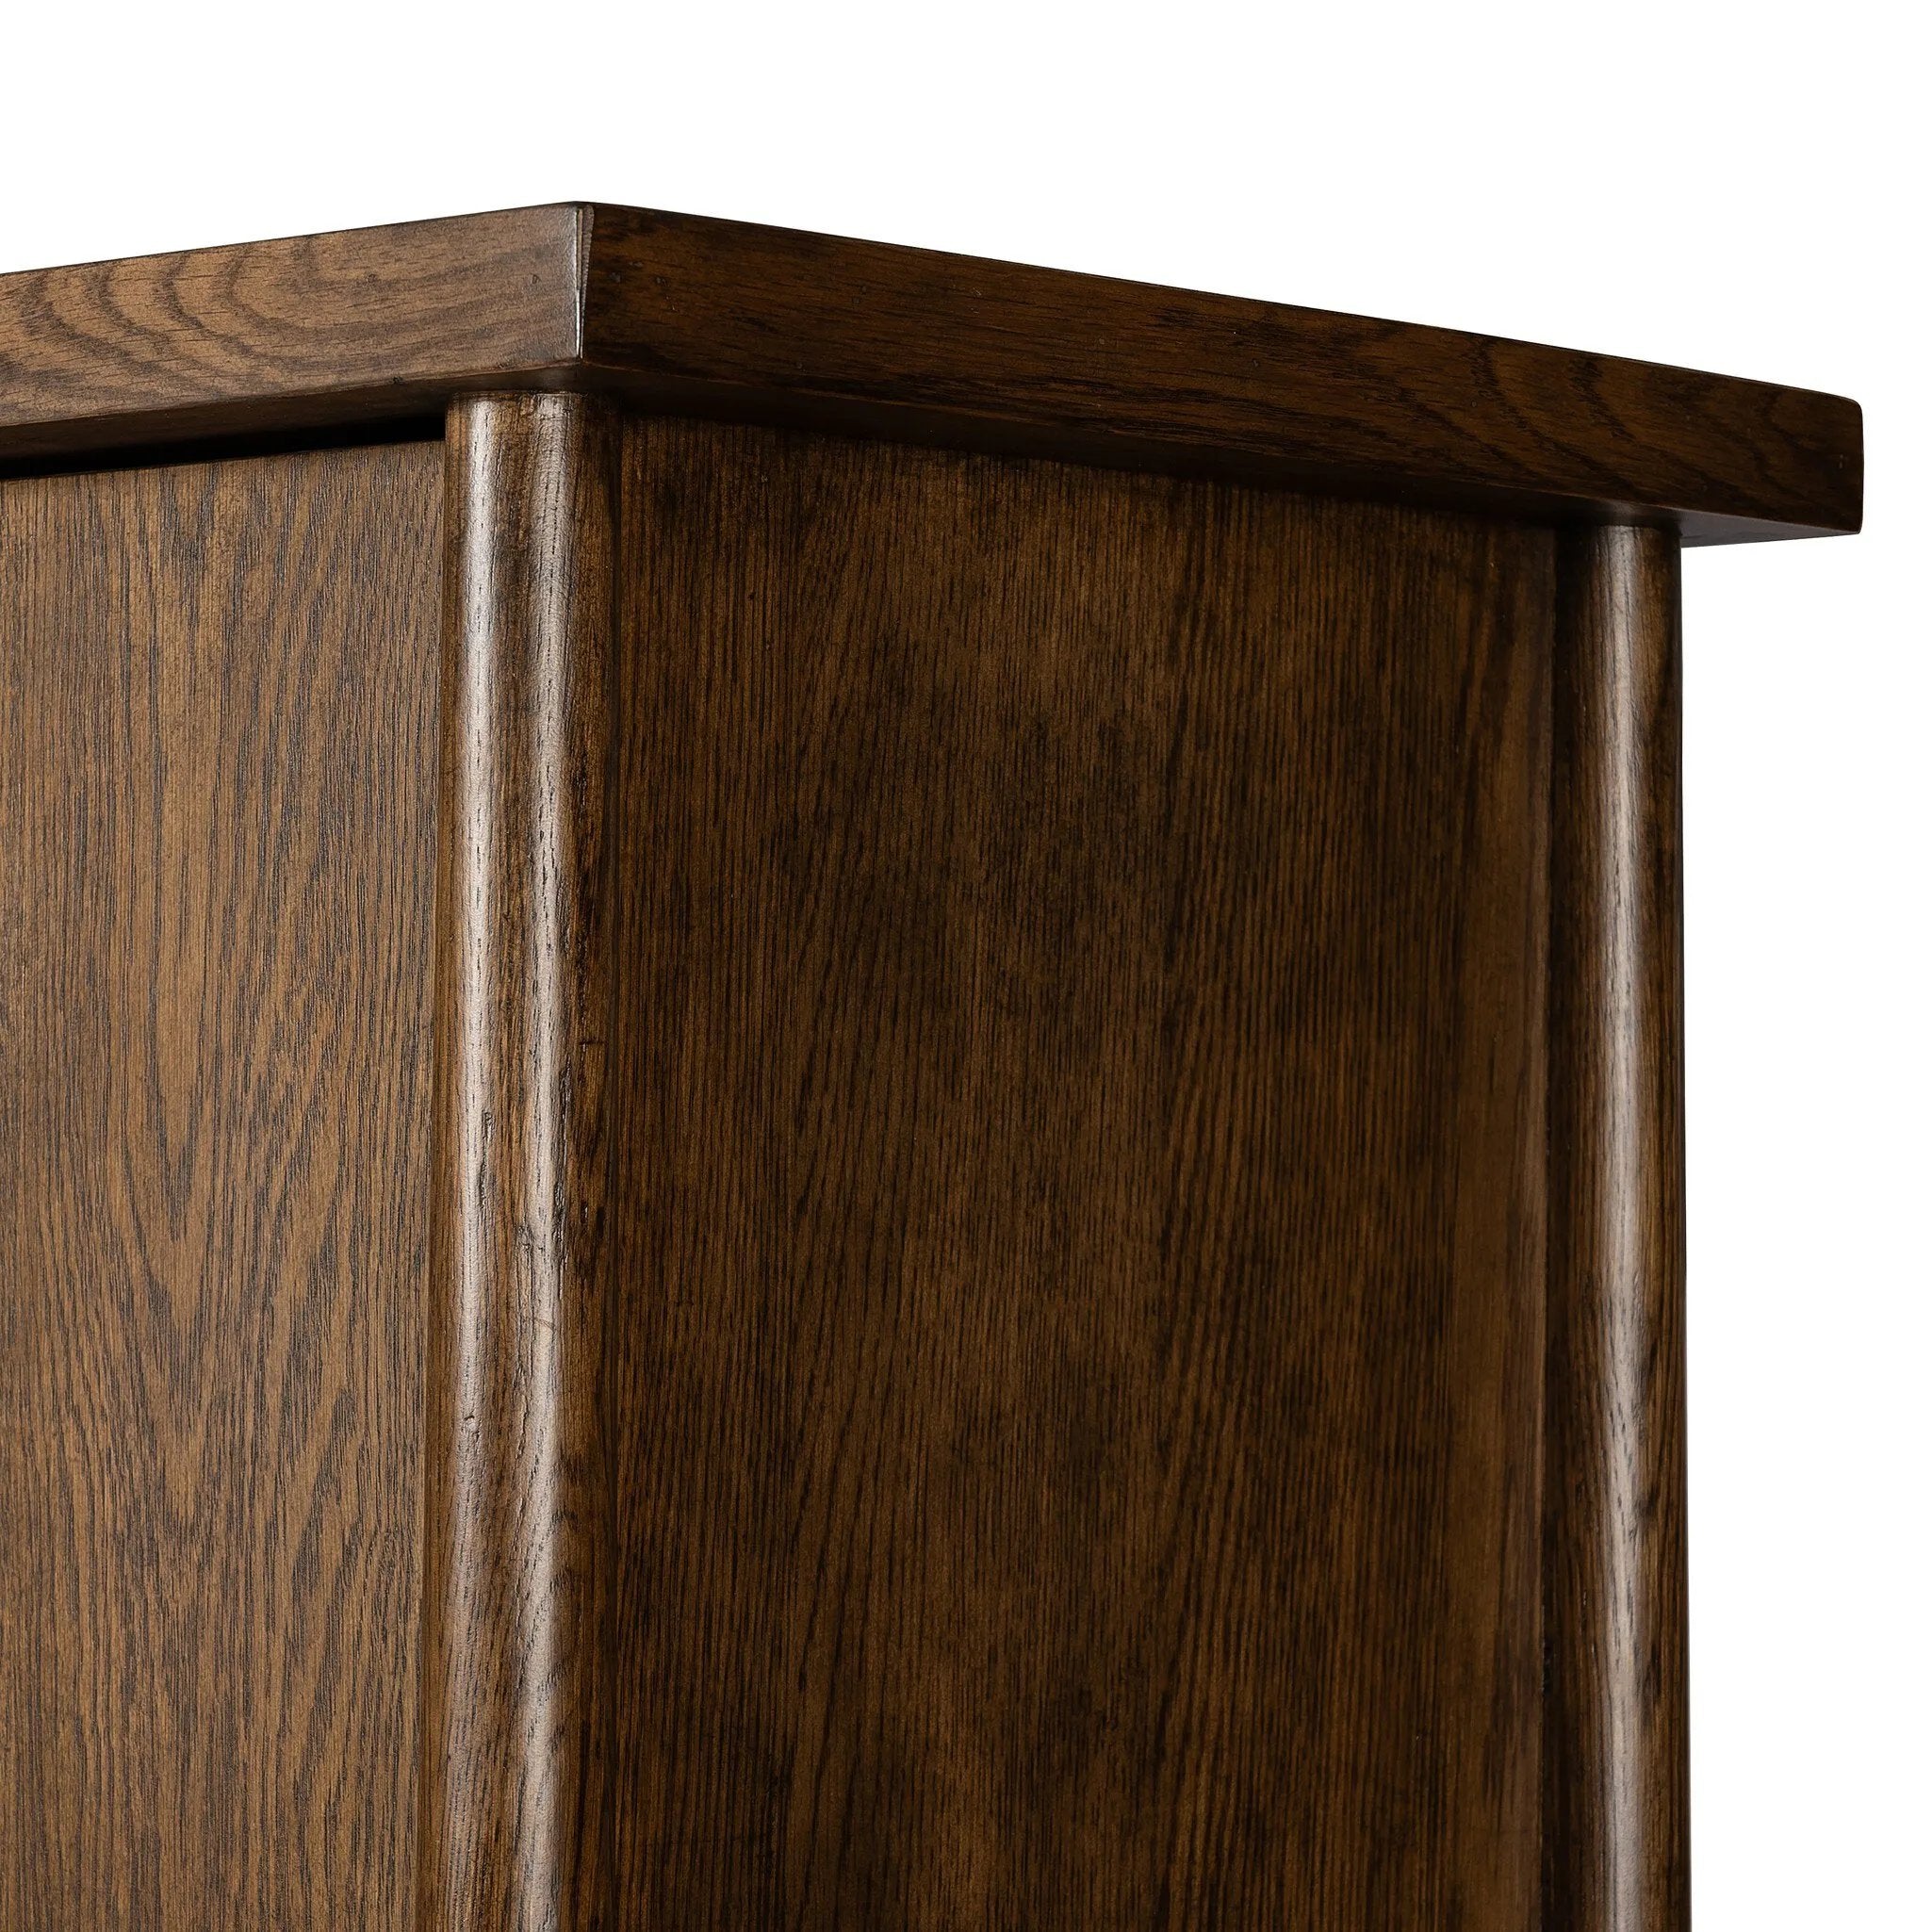 A beautifully simple statement piece. This three-door cabinet is crafted from a mix of solid oak and veneer in a dark toasted finish. Details include subtle, tapered corner posts and minimal rounded door knobs.Collection: Well Amethyst Home provides interior design, new home construction design consulting, vintage area rugs, and lighting in the Salt Lake City metro area.